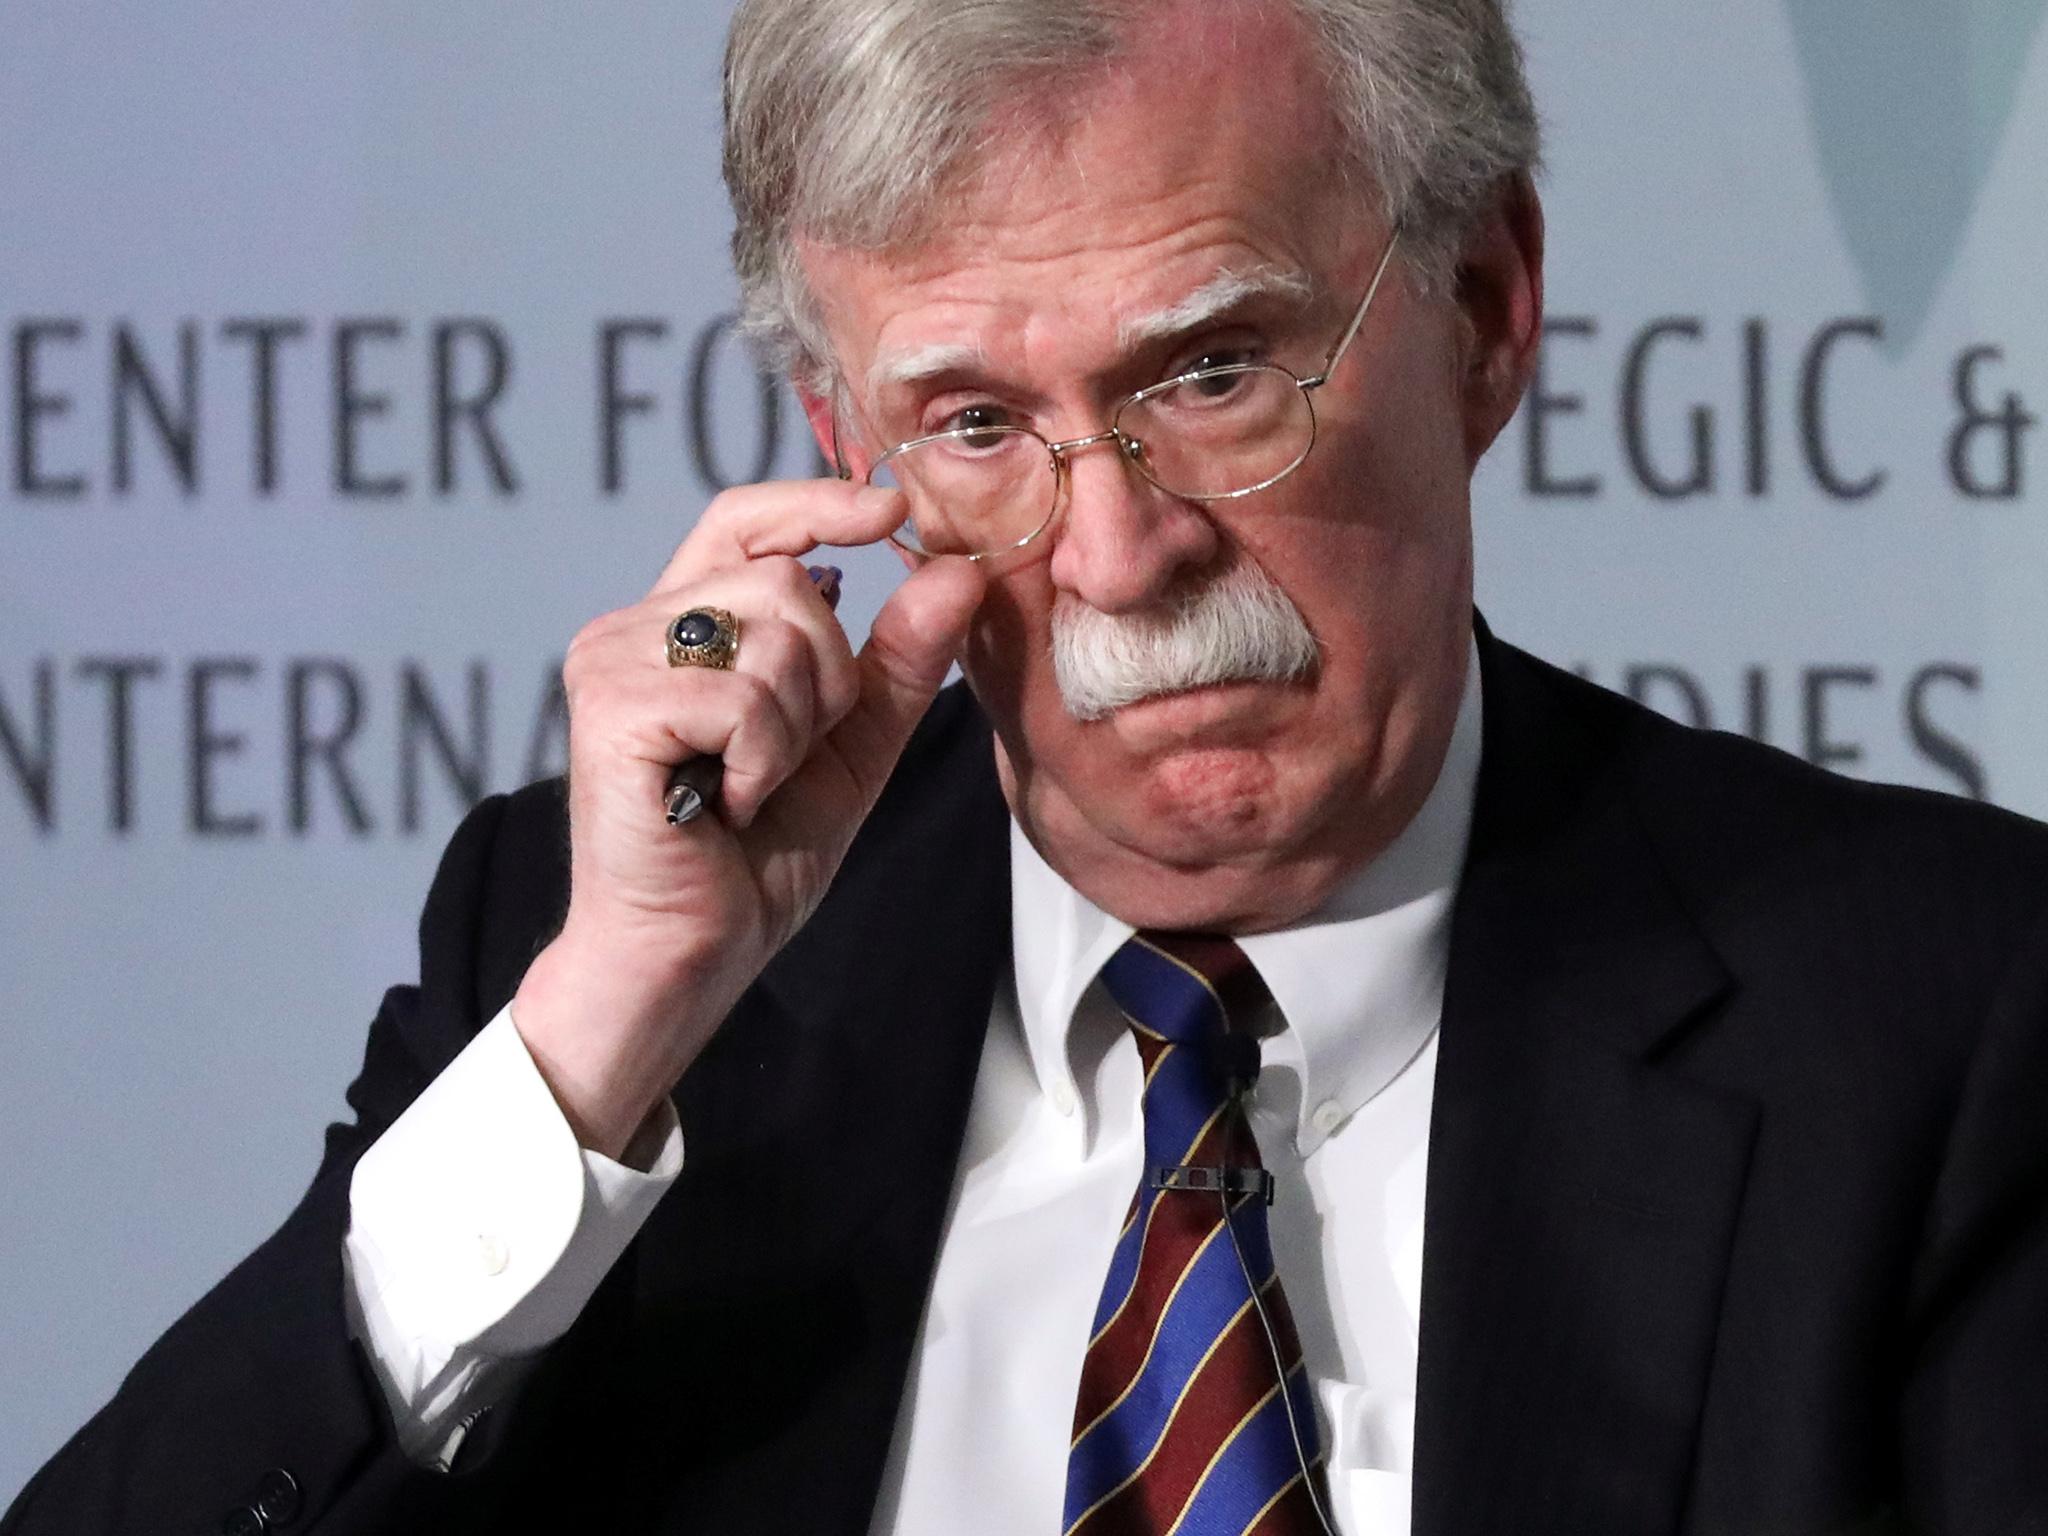 Bolton is expected to be a significant witness to the inquiry